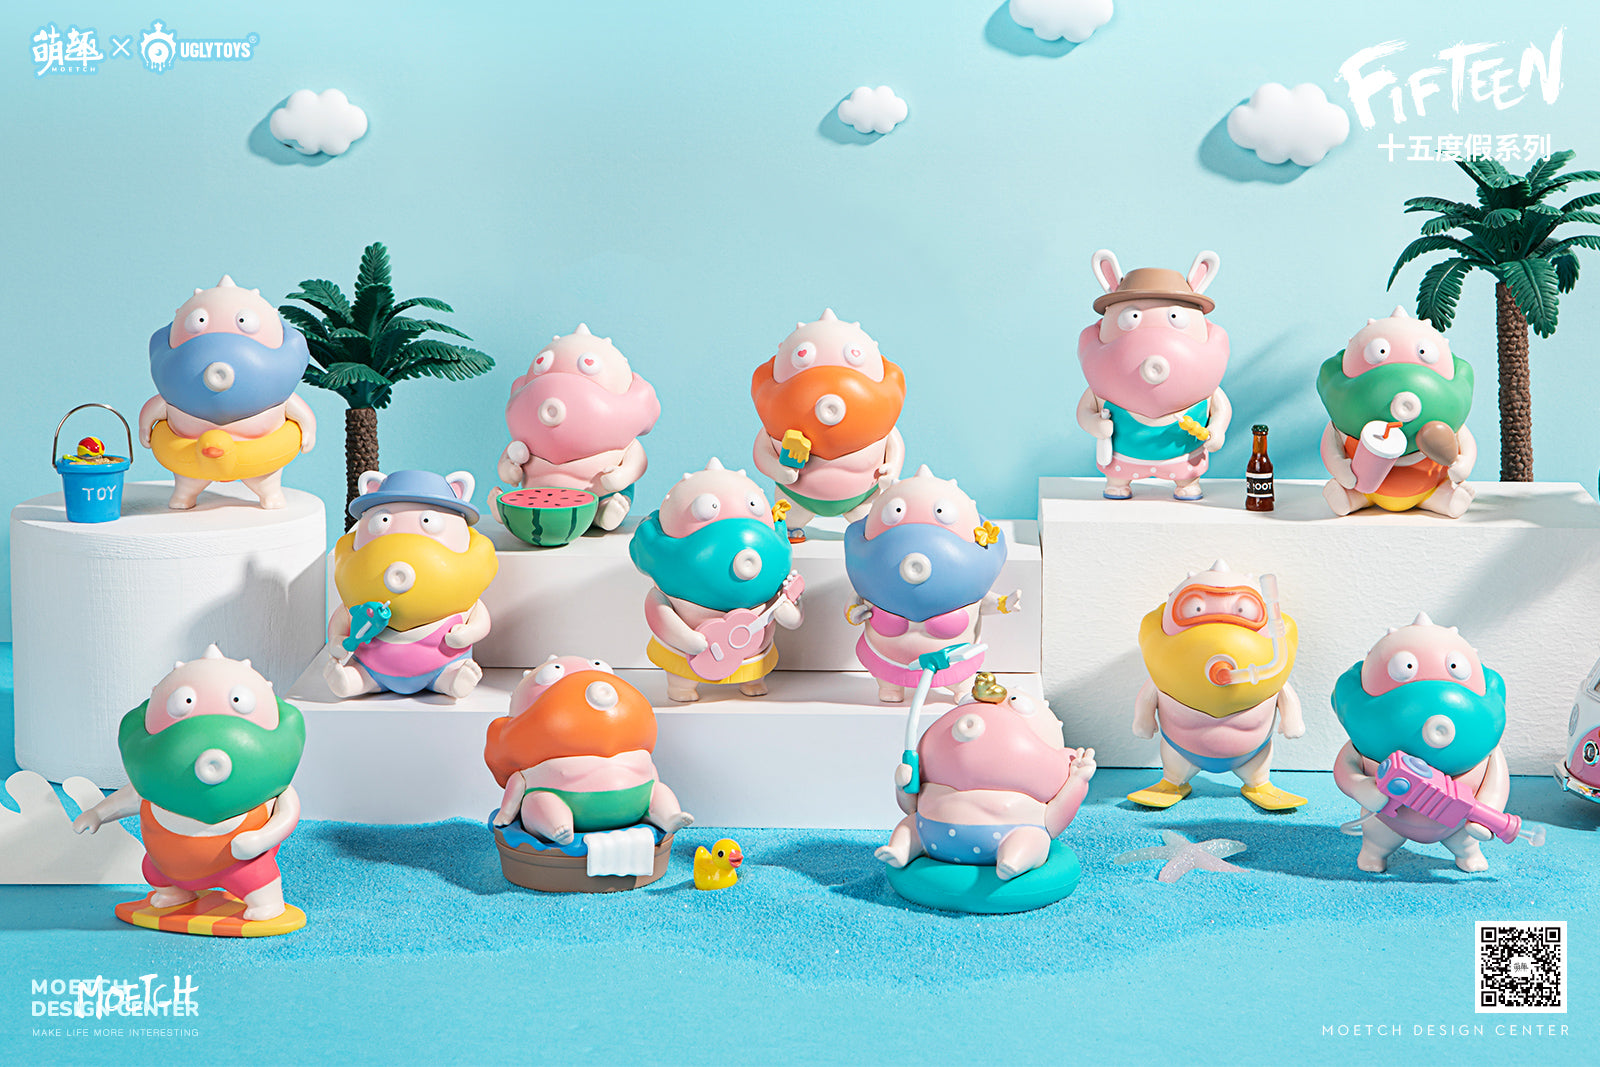 Fifteen Blindbox Series by Ugly Toys x Moetch: Toy figurines, rubber duck, palm tree, surfboard man, cartoon characters, and more in playful scenes.